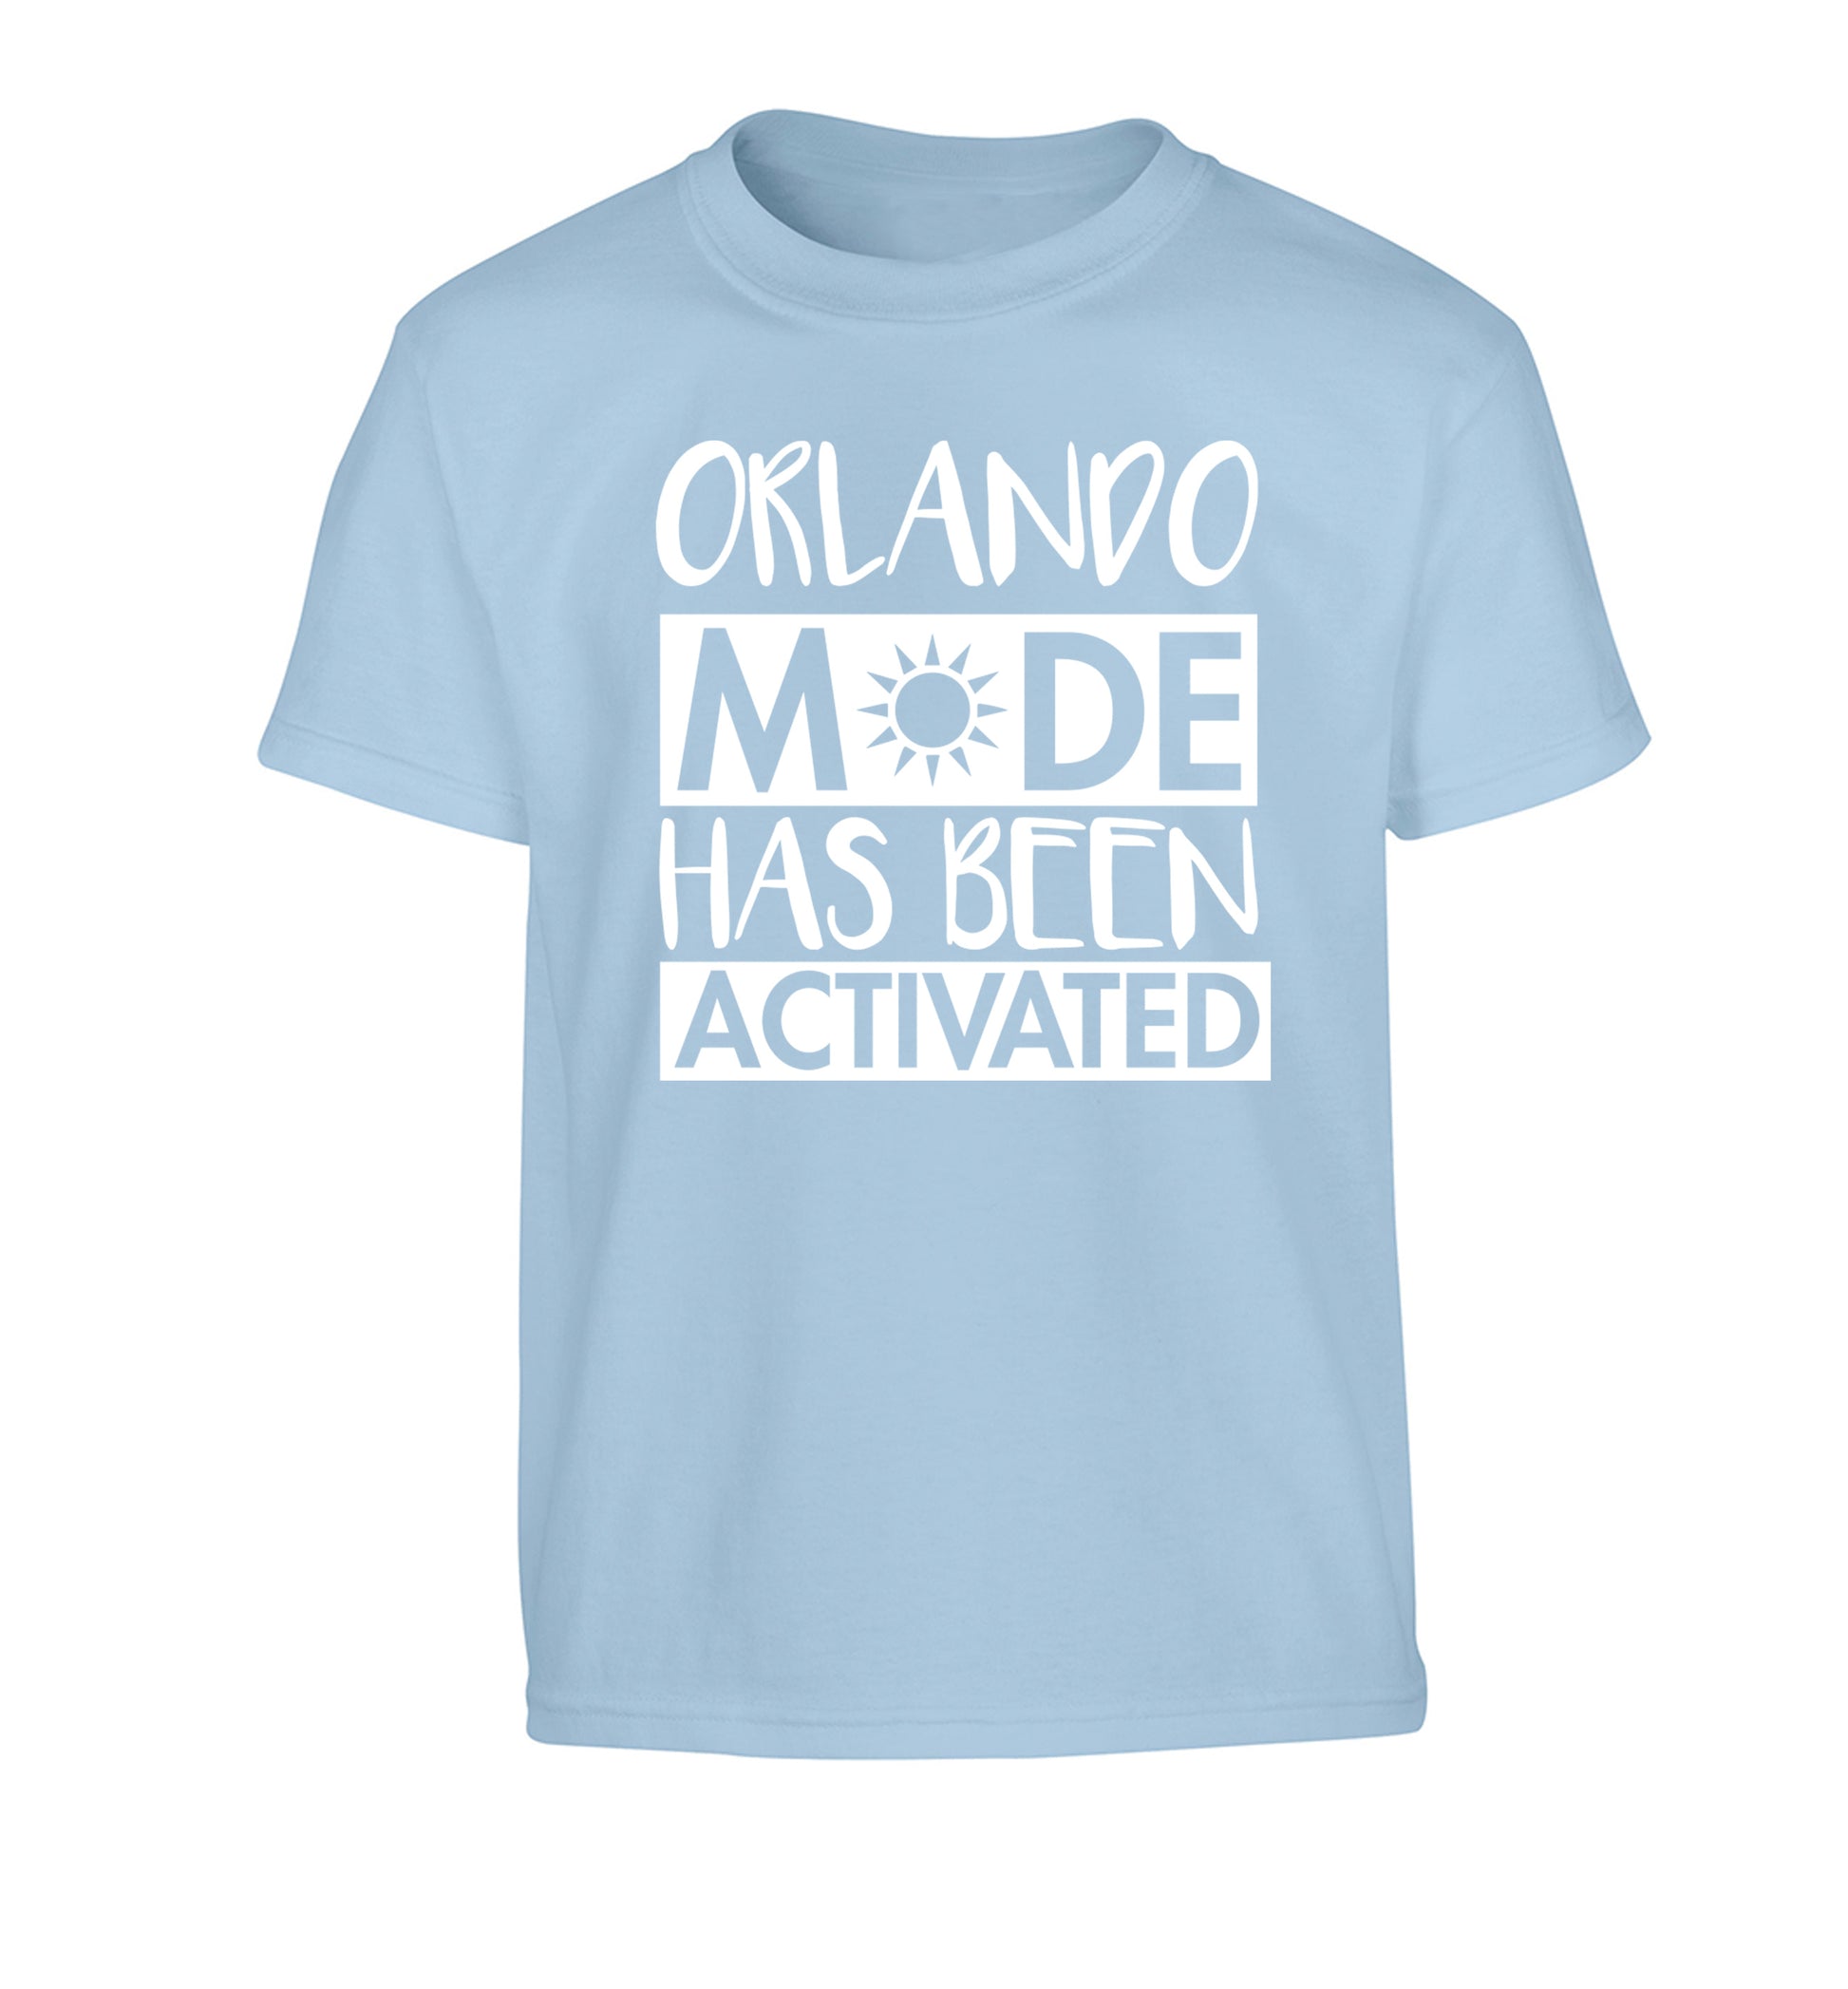 Orlando mode has been activated Children's light blue Tshirt 12-13 Years